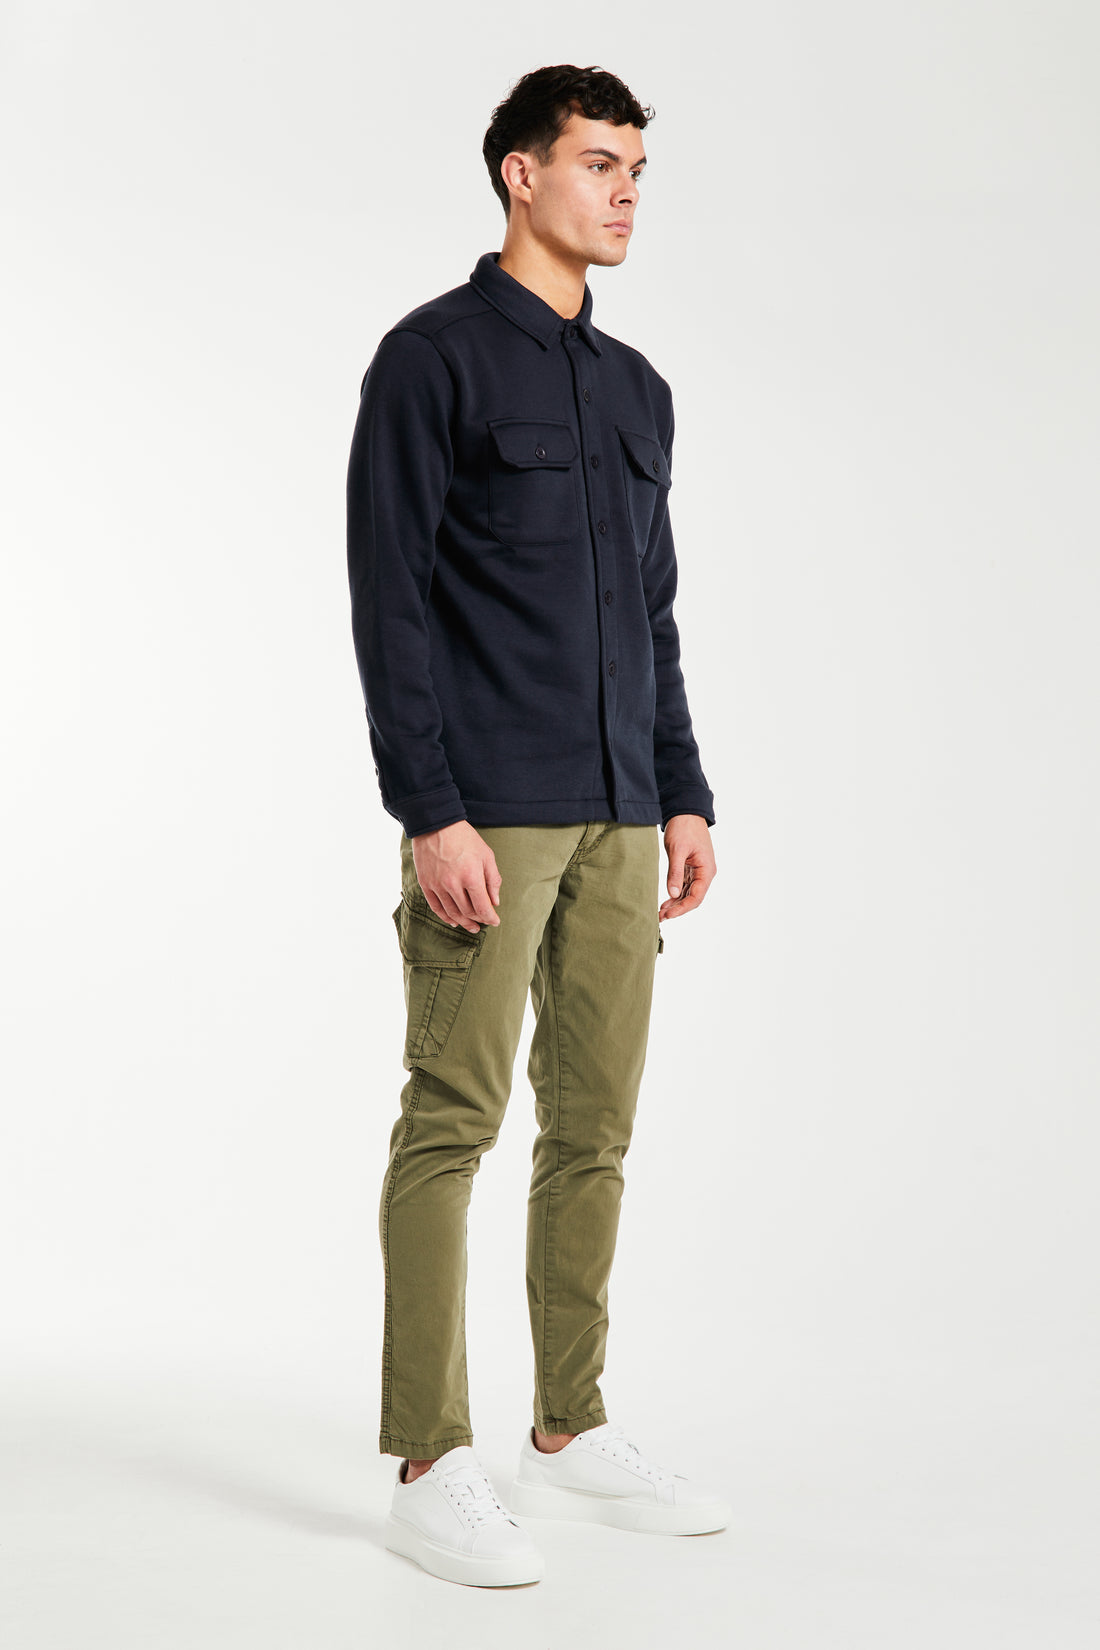 Cheap men's overshirt with cuffed sleeves in navy